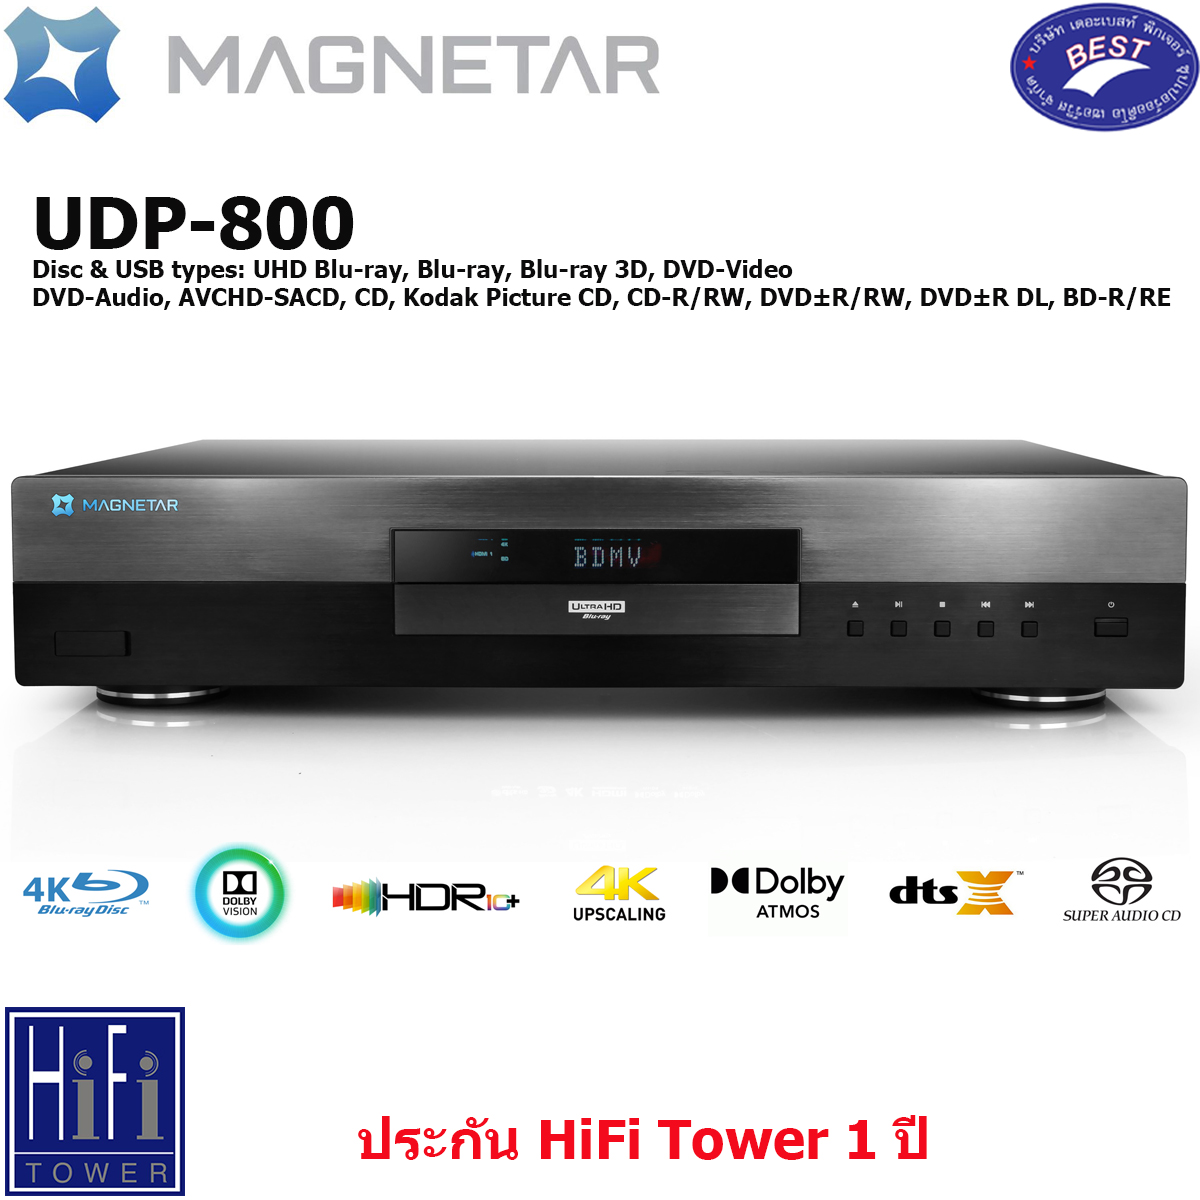 Magnetar UDP800 review: a 4K Blu-ray player with astounding video and audio  quality